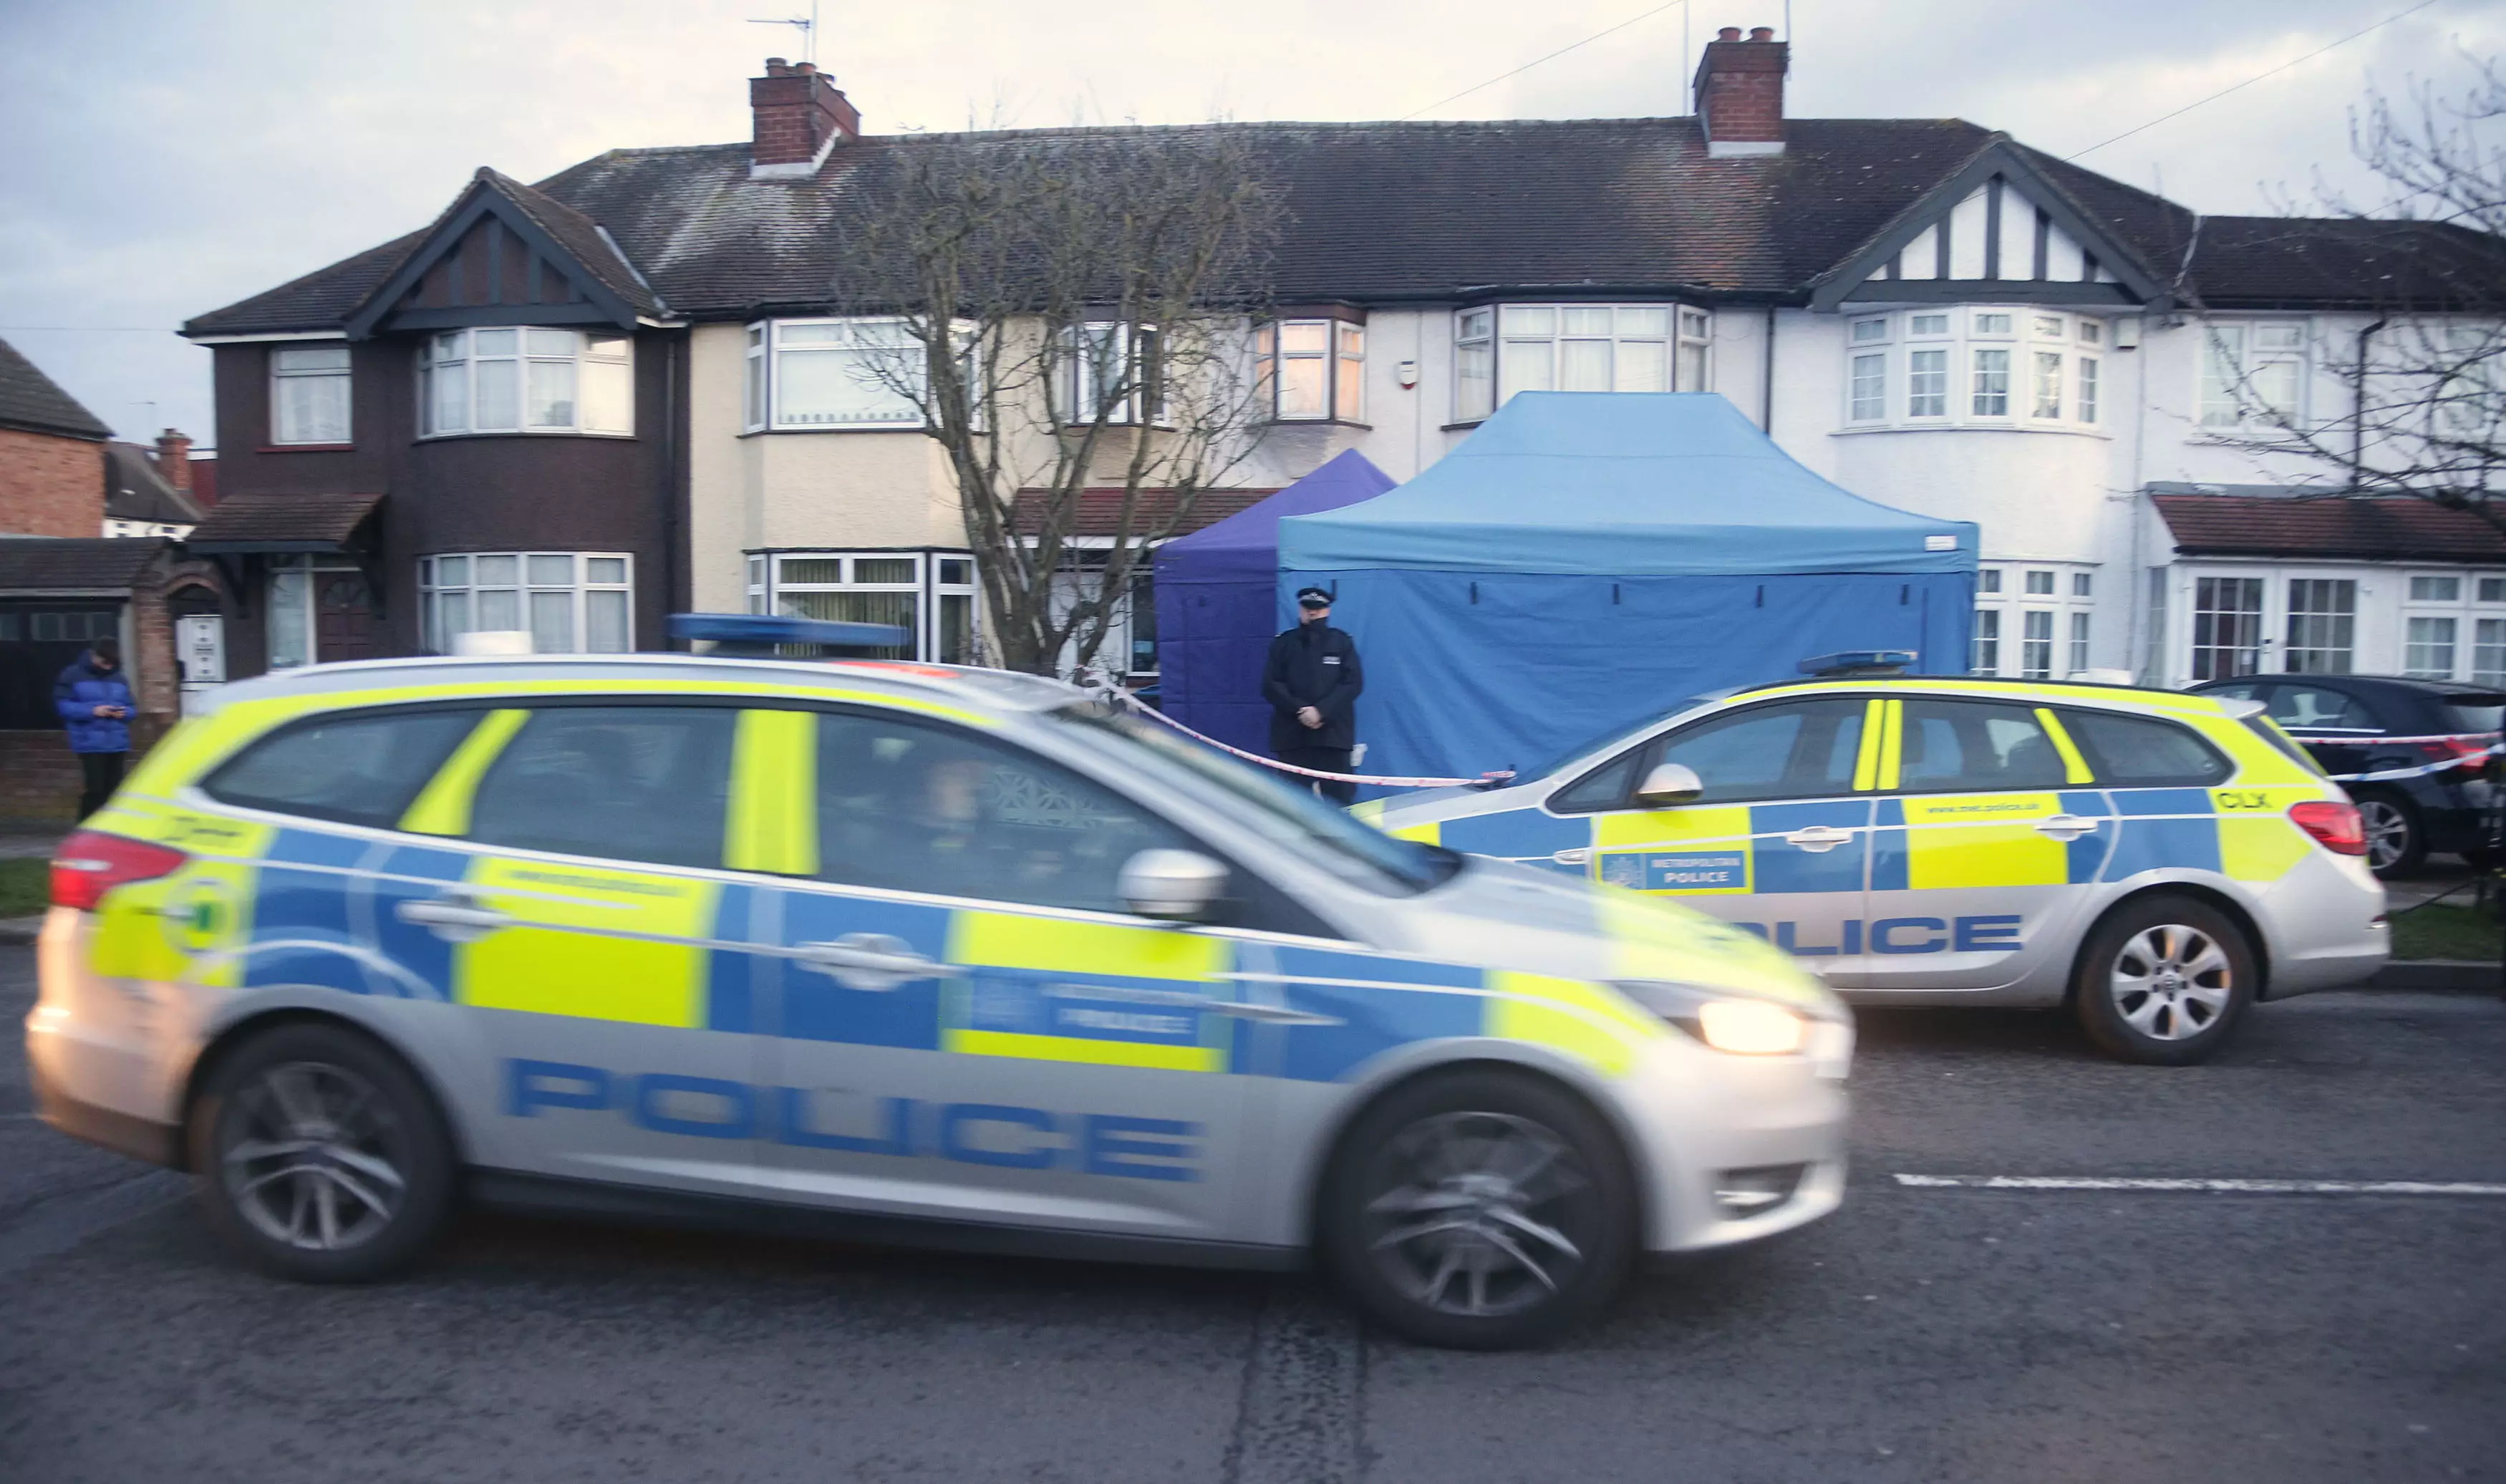 The address which has been sealed-off by police after Nikolai Glushkov has been found dead (